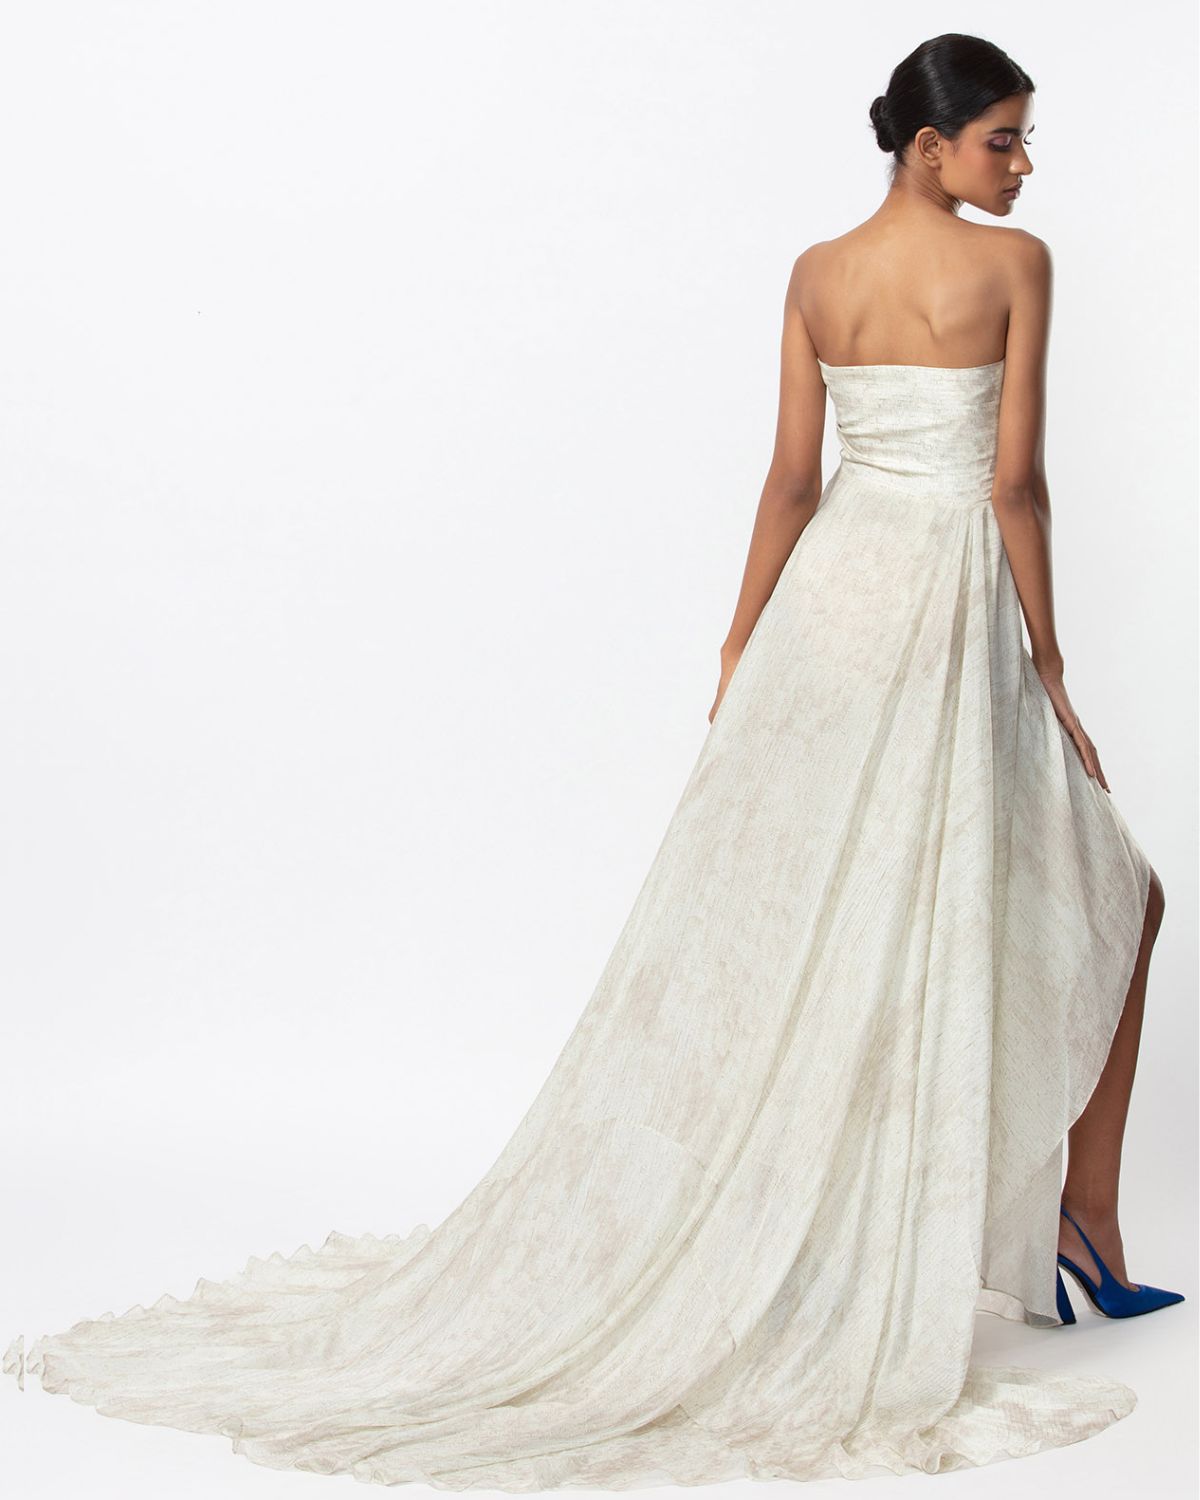 Ivory Satin & Chiffon Hand Embroidered Gown